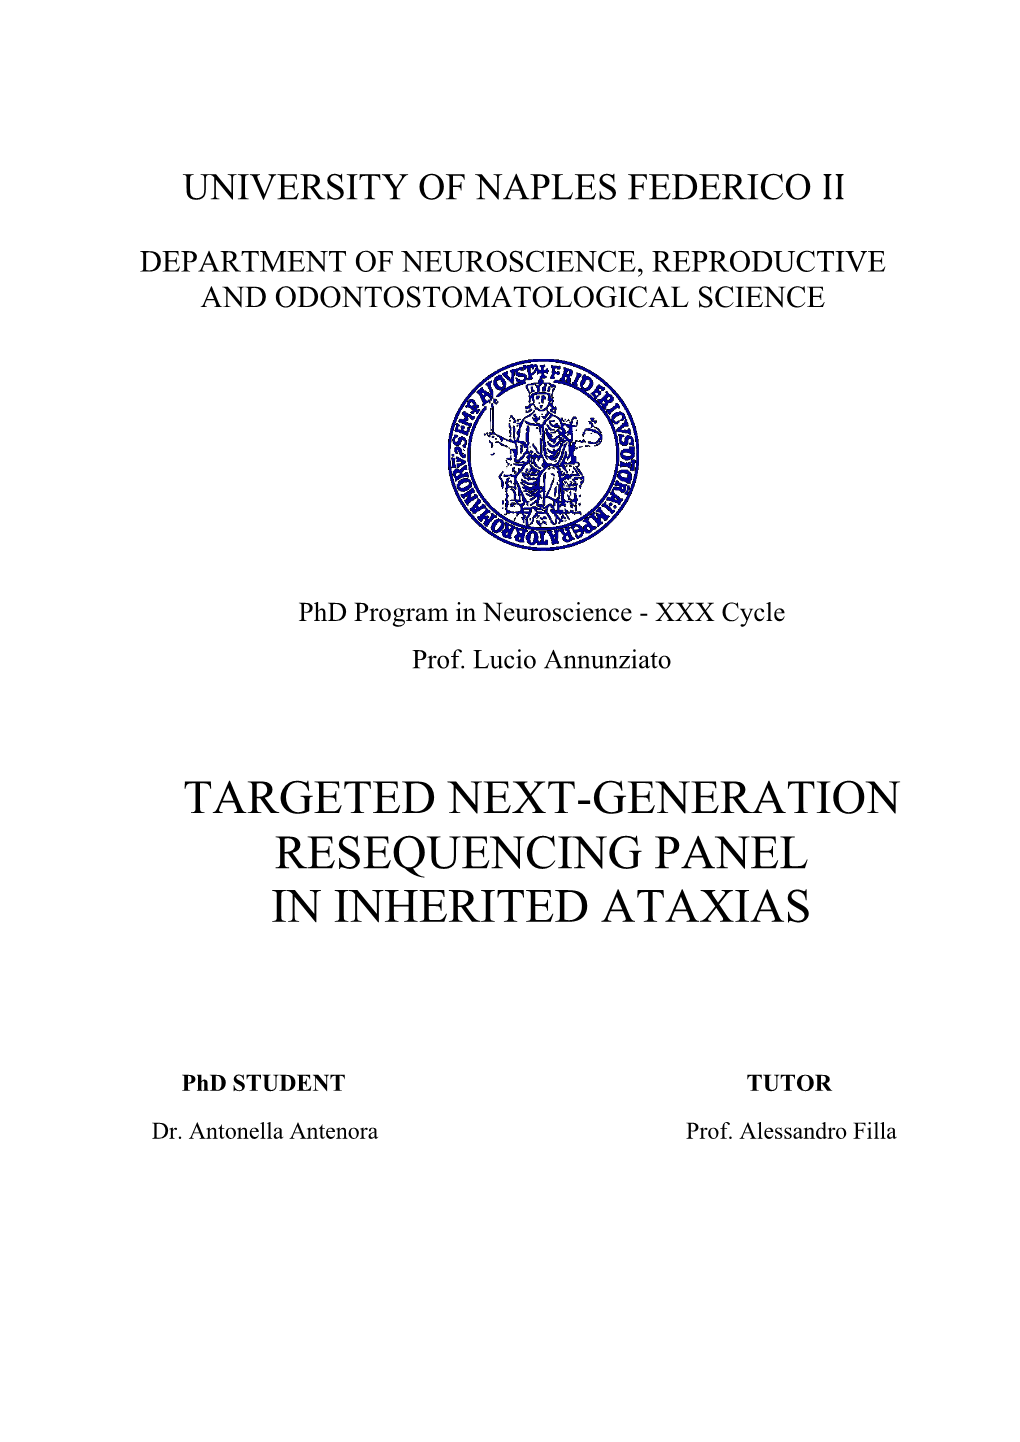 Targeted Next-Generation Resequencing Panel in Inherited Ataxias